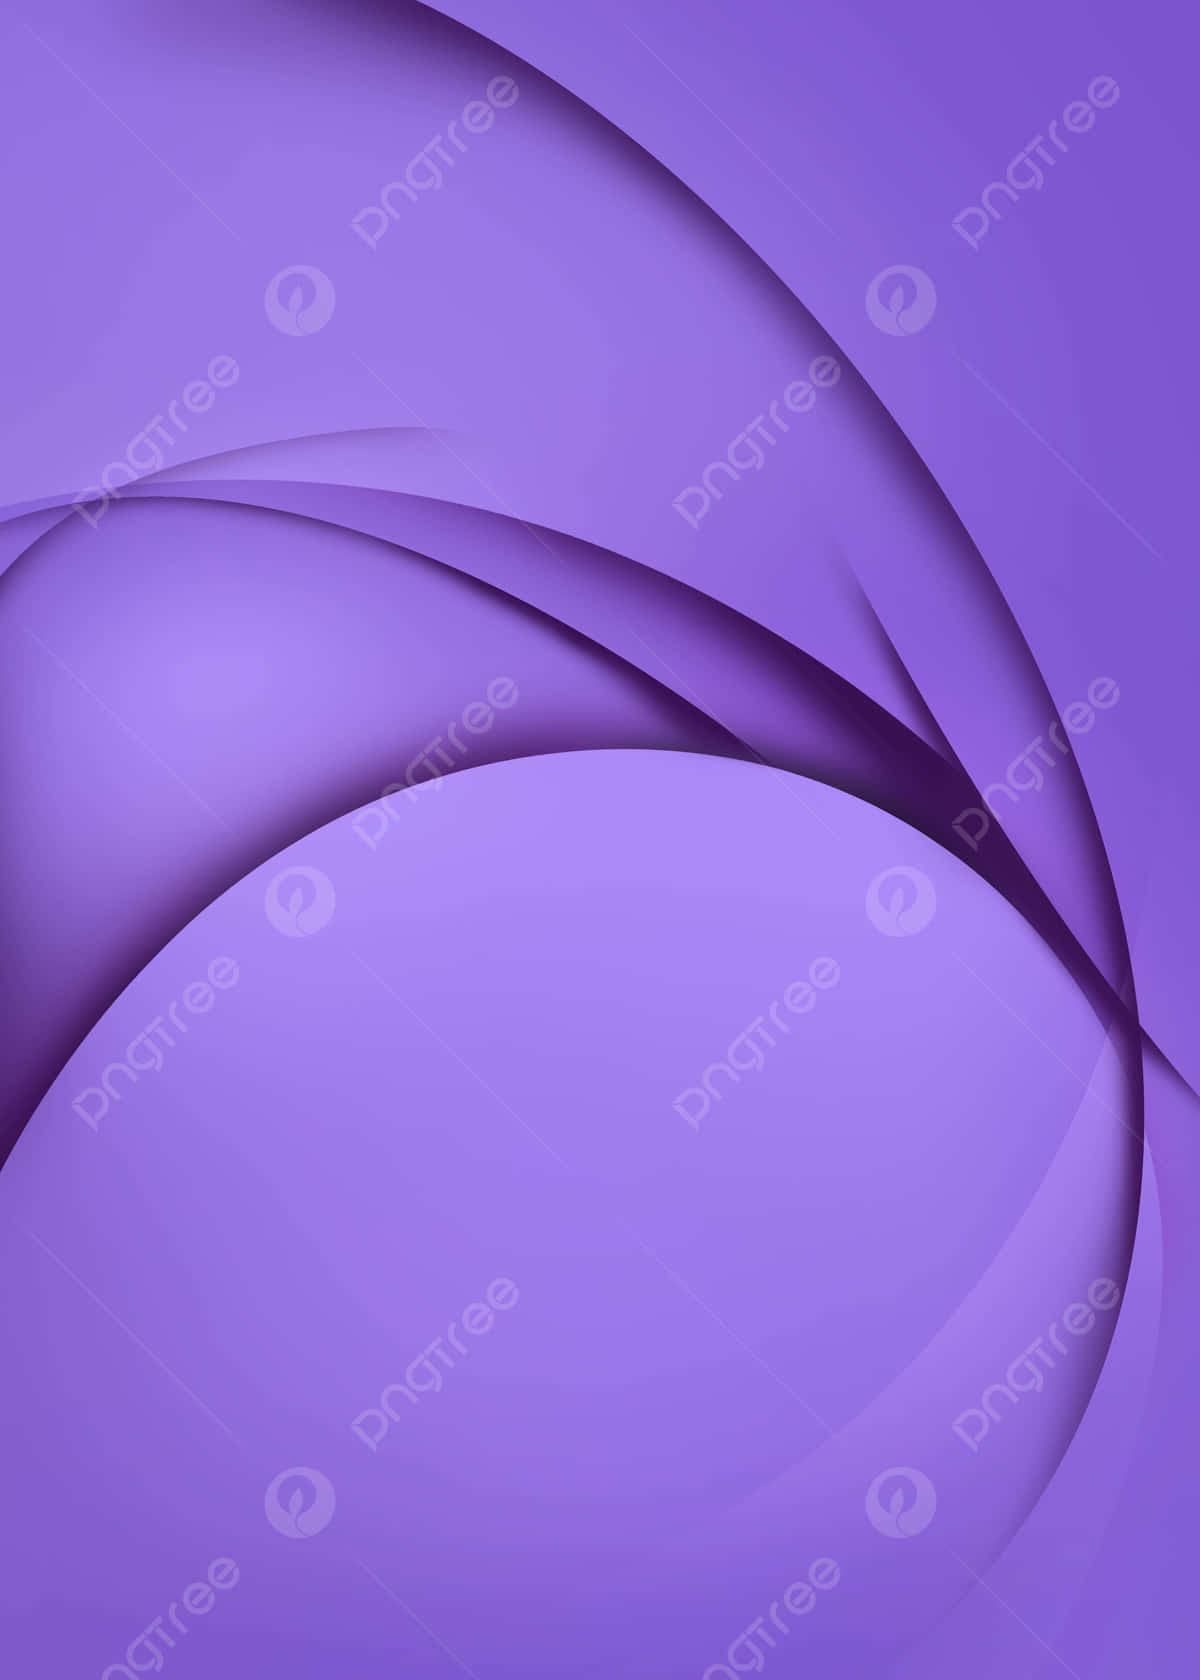 Unique and Eye-Catching Purple Textured Wallpaper Wallpaper